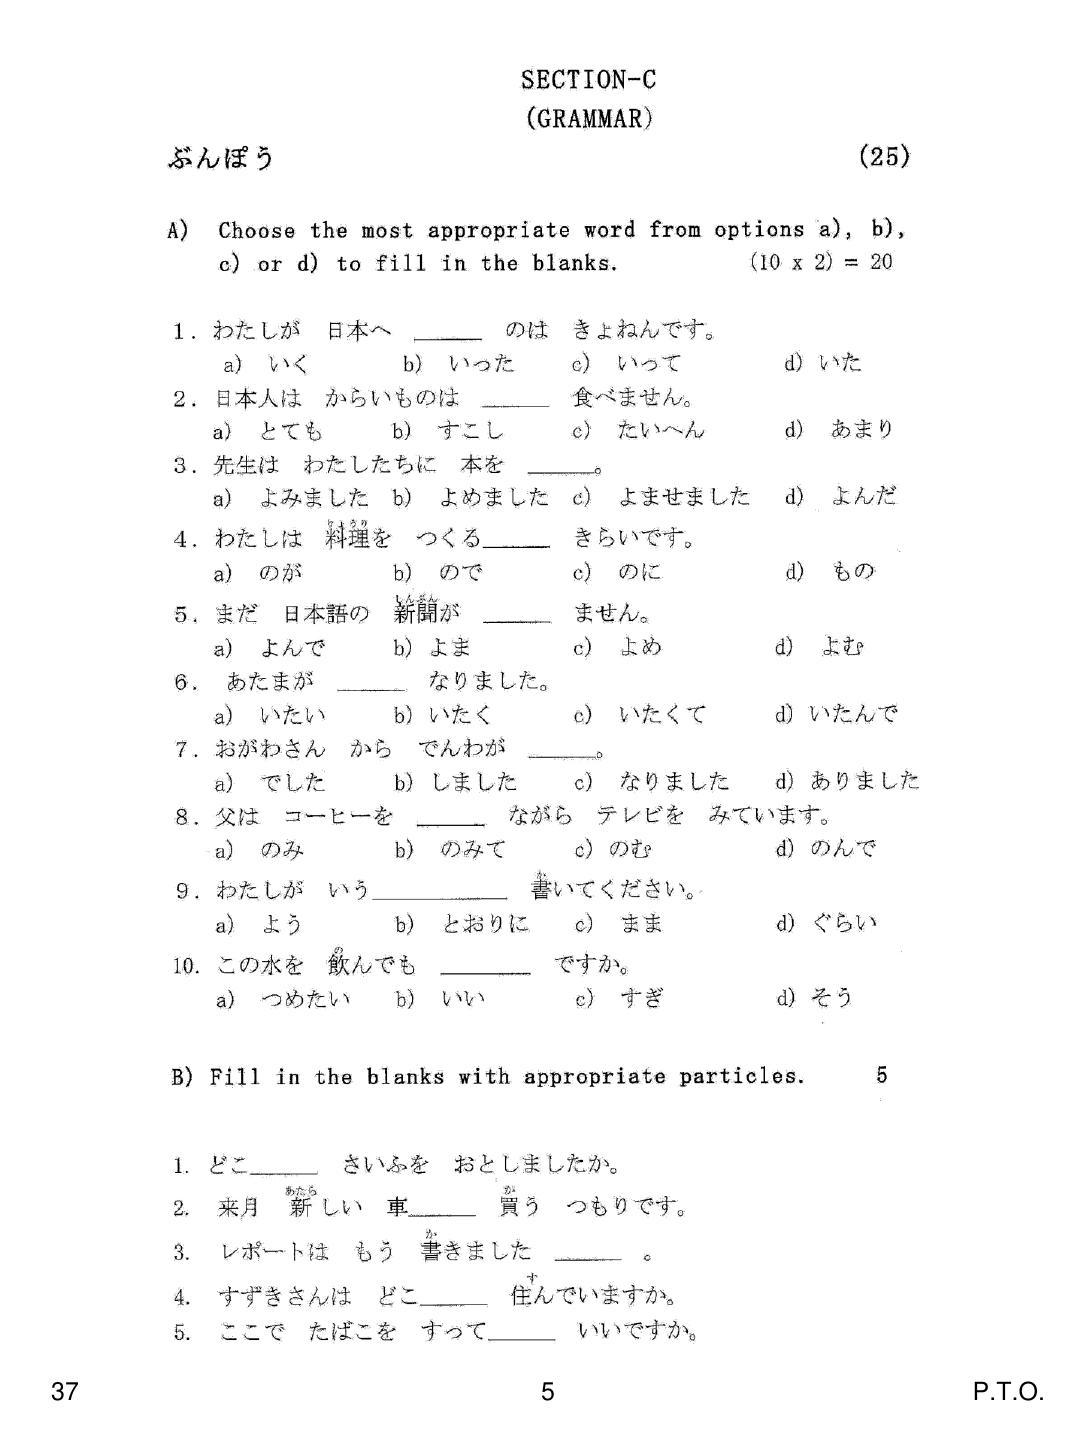 CBSE Class 12 37 JAPANESE 2018 Question Paper - Page 5